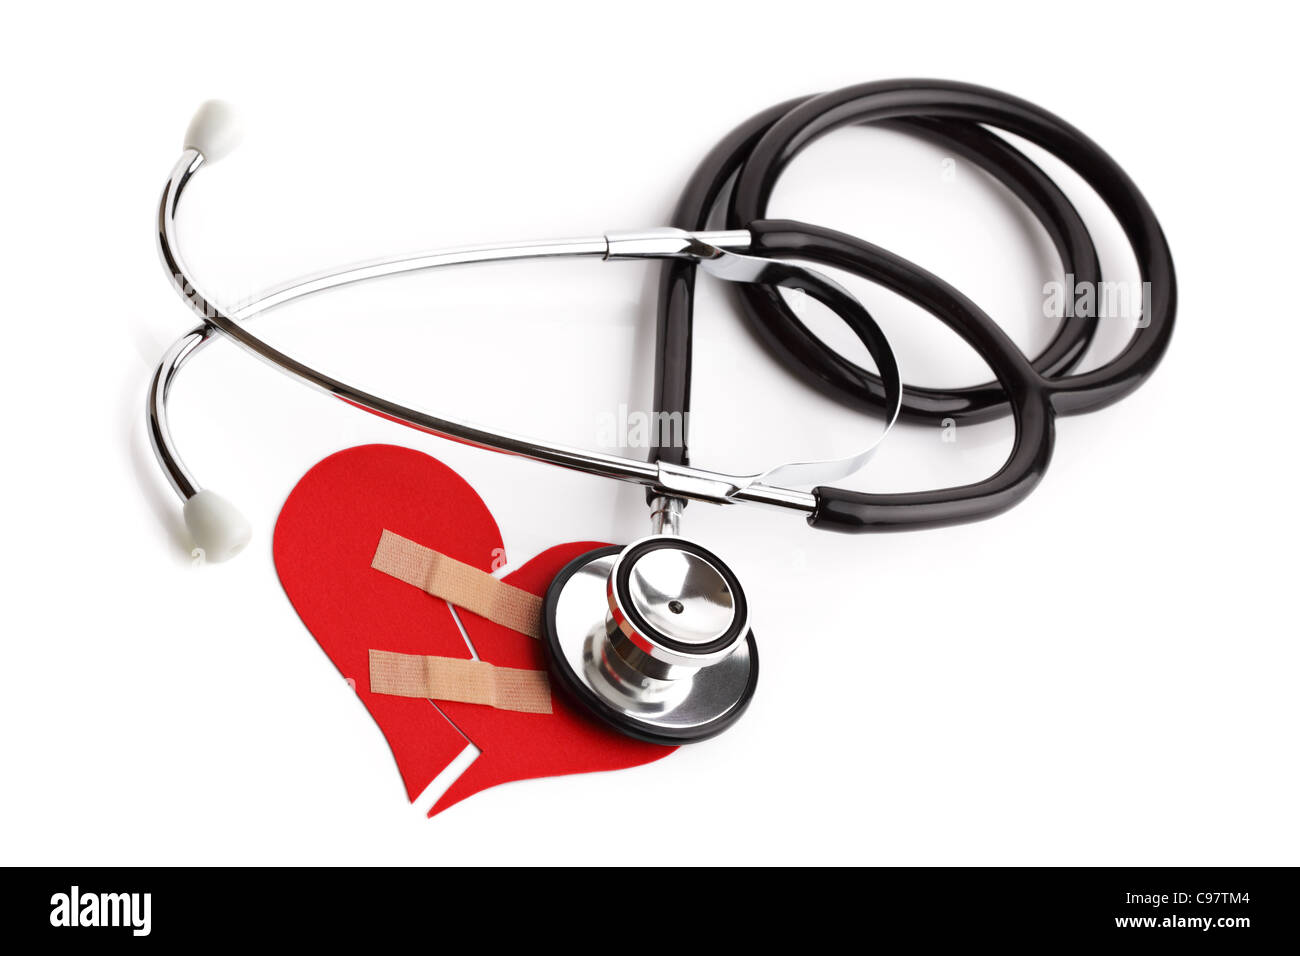 Stethoscope and broken heart concept for heart disease or illness Stock Photo